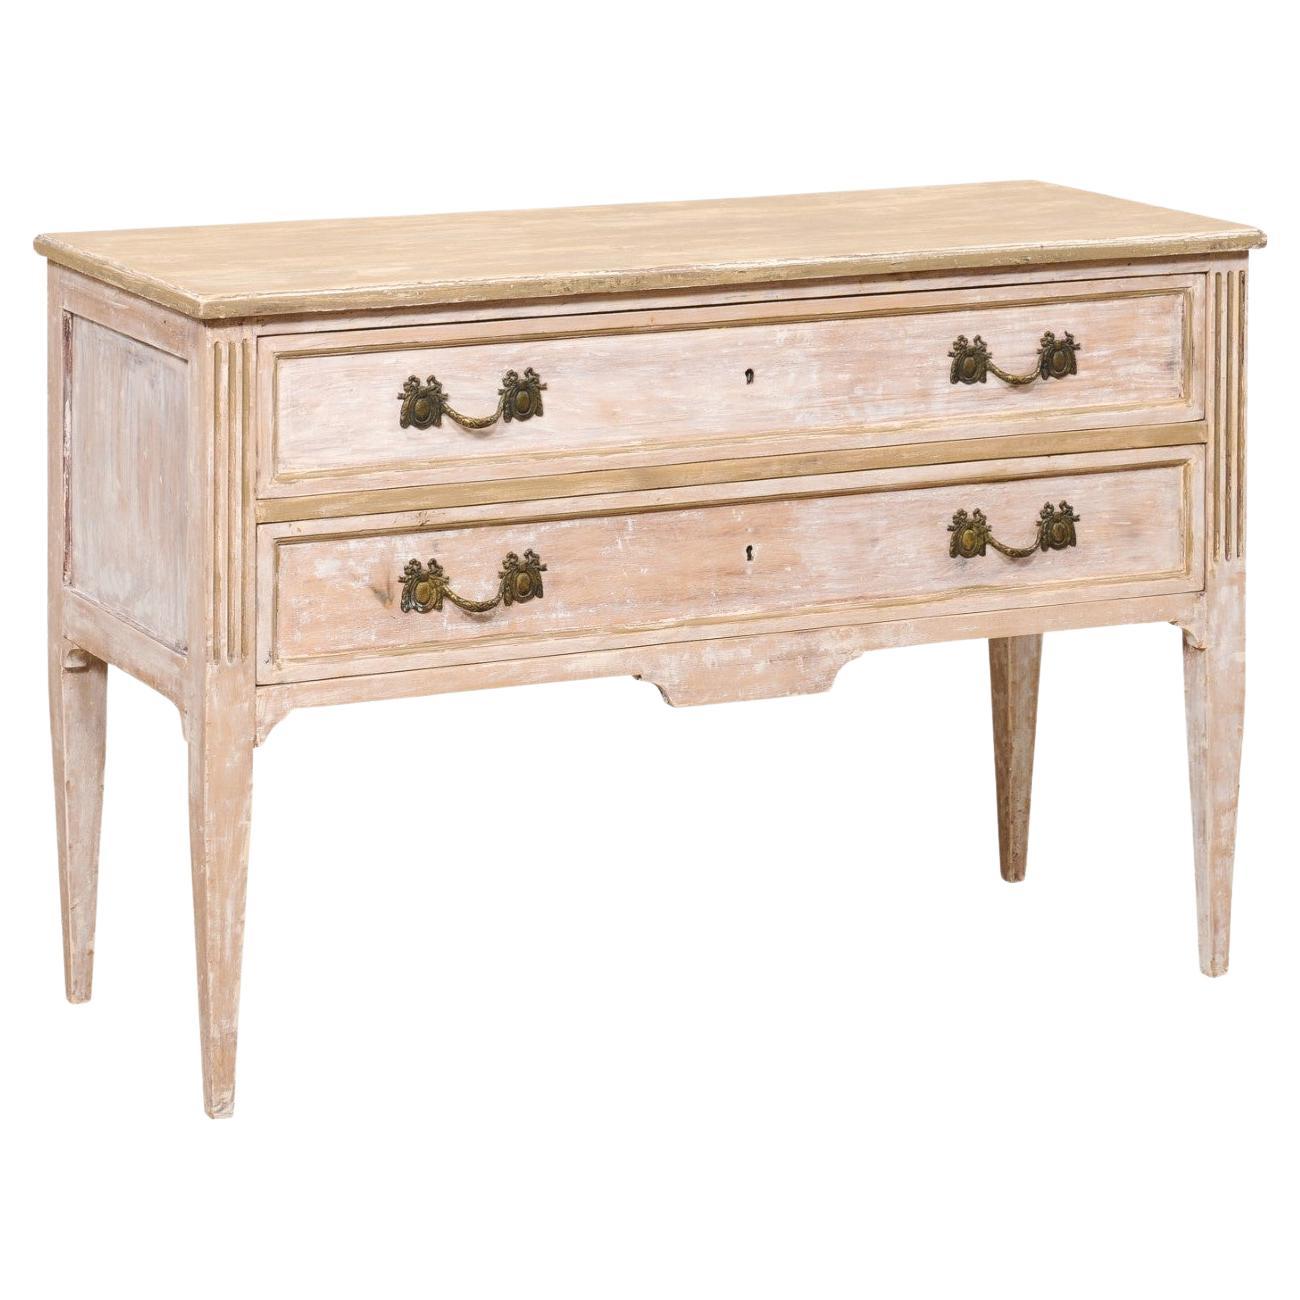 Italian Neoclassical Style Raised Two-Drawer Chest, Mid-20th Century